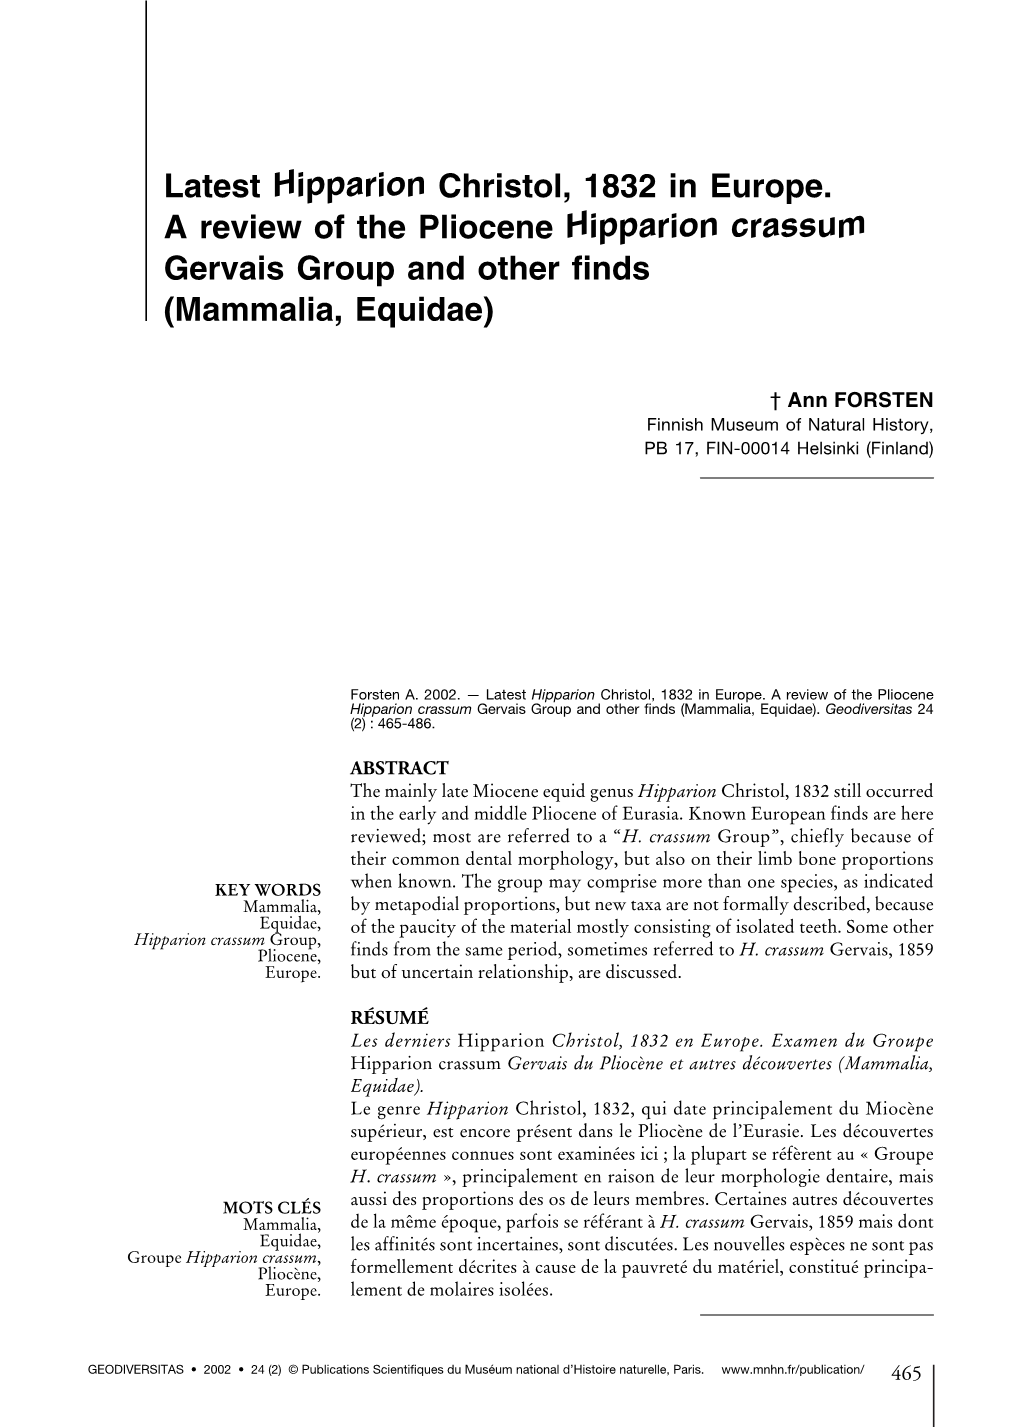 Latest Hipparion Christol, 1832 in Europe. a Review of the Pliocene Hipparion Crassum Gervais Group and Other Finds (Mammalia, Equidae)